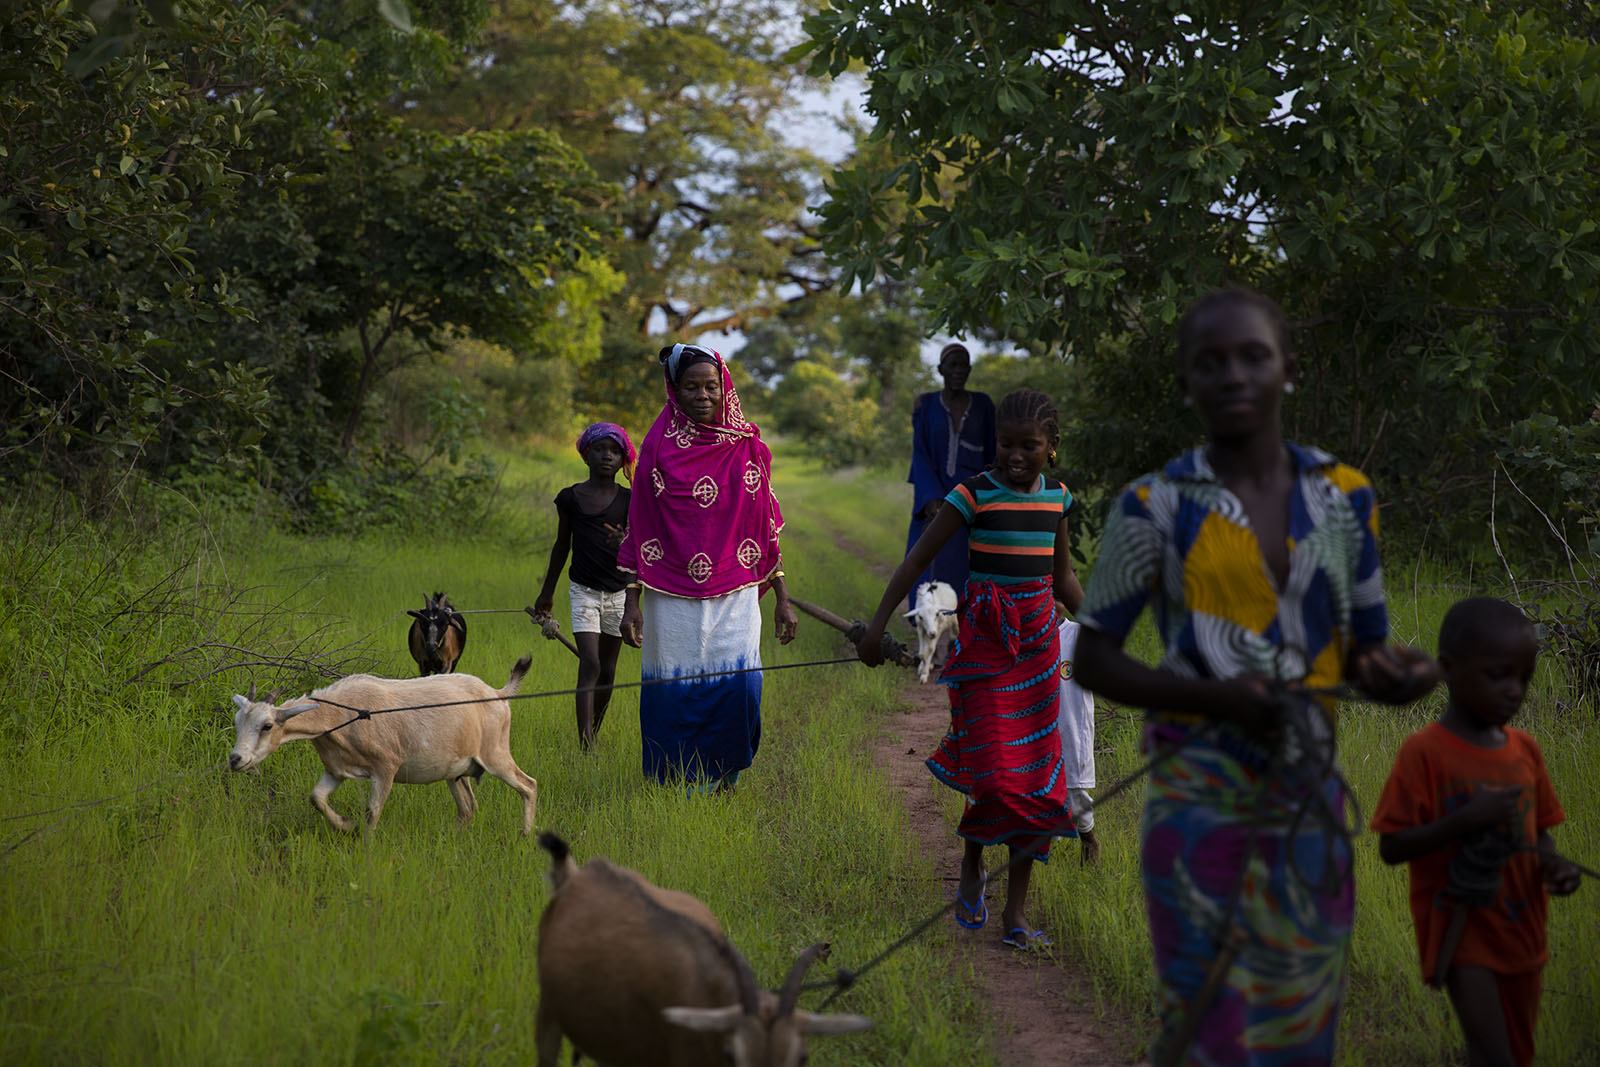  Mariama Balde, and her husband Hogo Mballo, take their sheep and goats to graze in a field a couple of feet away from their home on Sept 6, 2019 in Kolda, Senegal. Along with Mariama and Hogo, their grandchildren enjoy to come help along the way. 